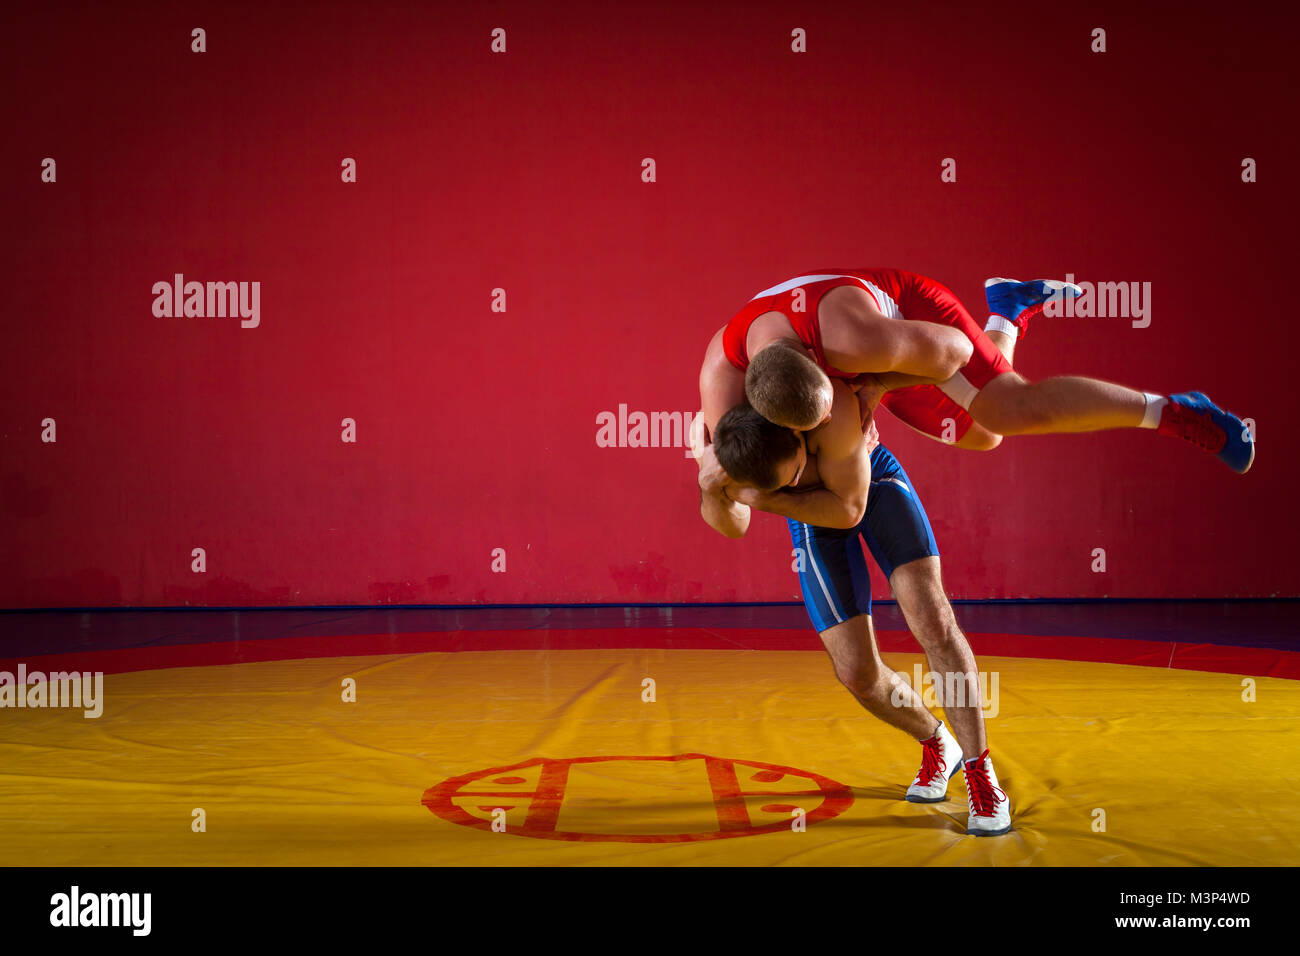 Two greco-roman  wrestlers in red and blue uniform wrestling   on a yellow wrestling carpet in the gym Stock Photo